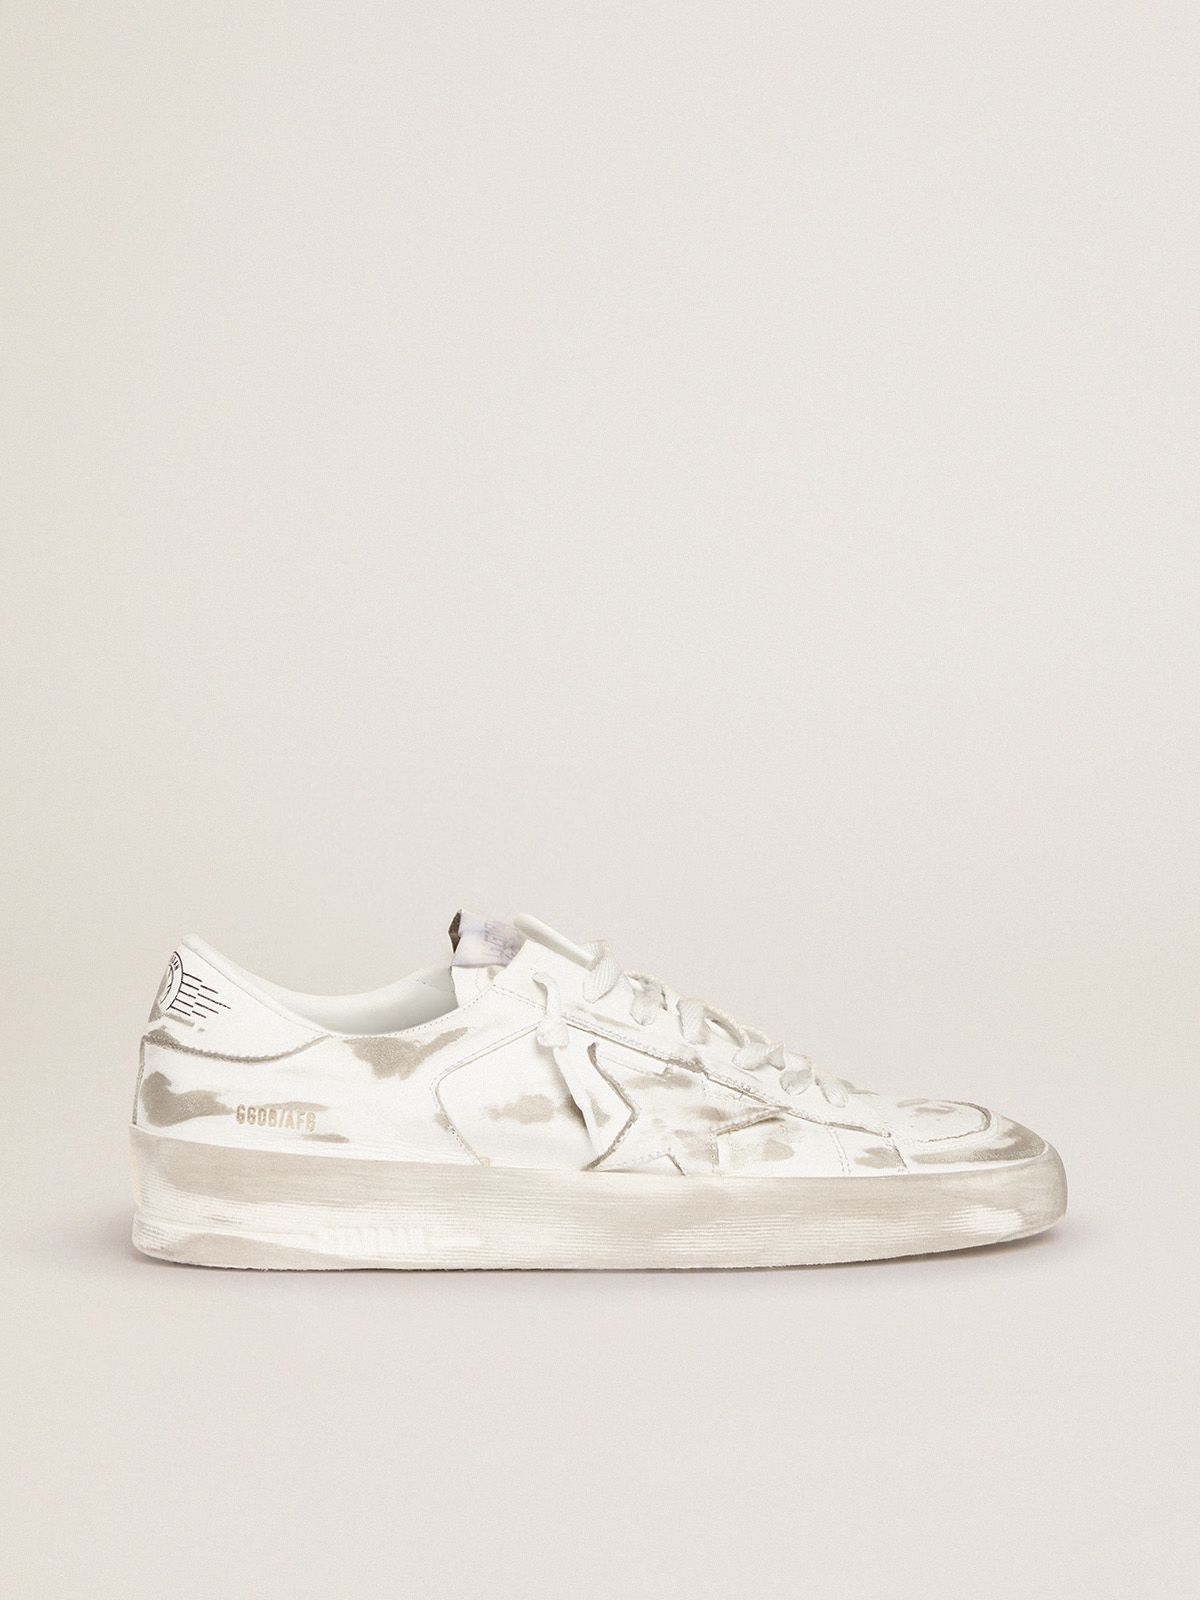 Stardan sneakers in white leather with lived-in treatment